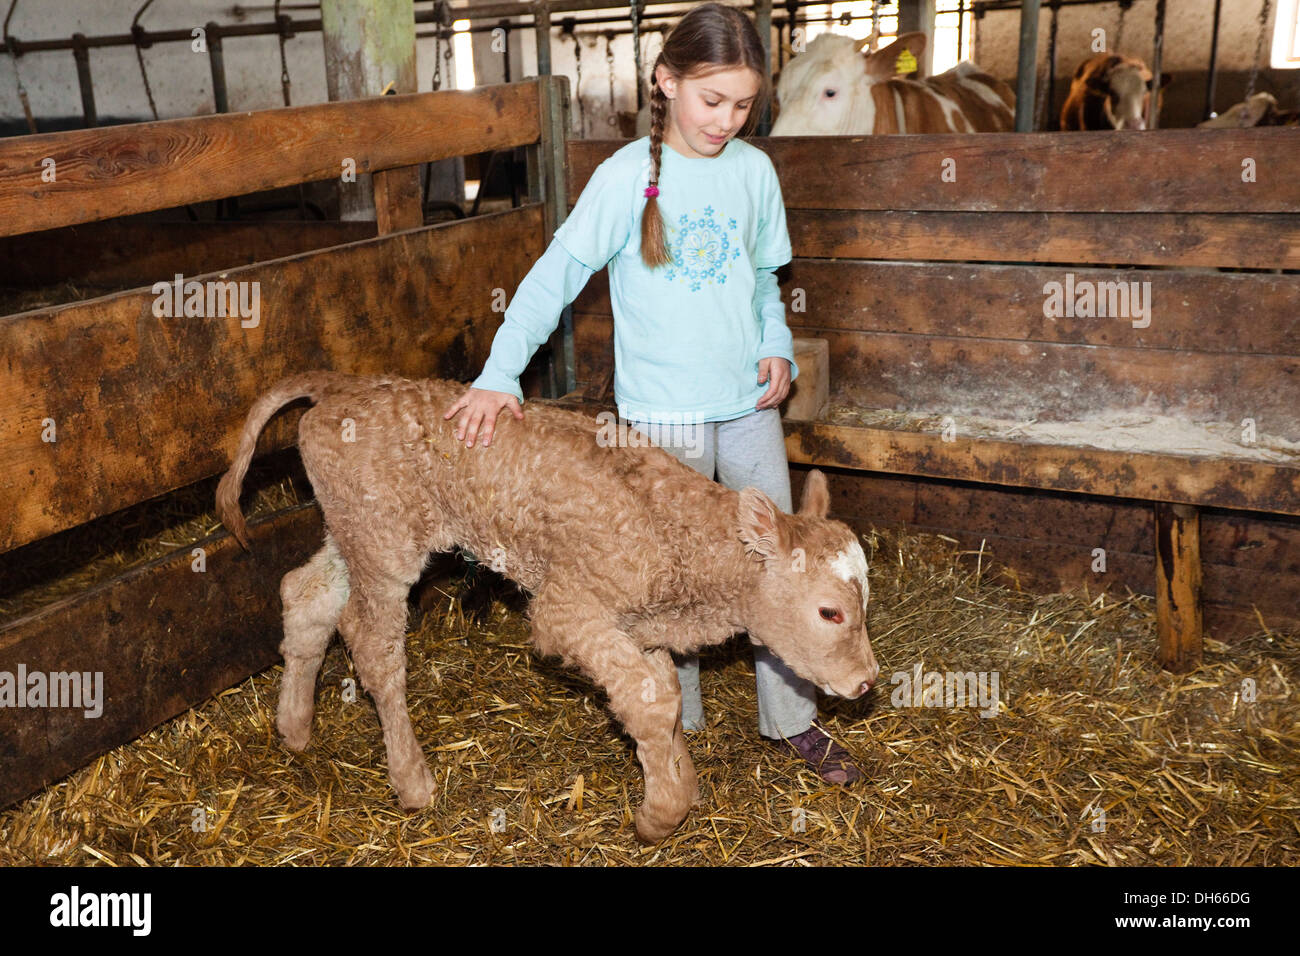 Girl with newborn calf in a stable, Austria, Europe Stock Photo